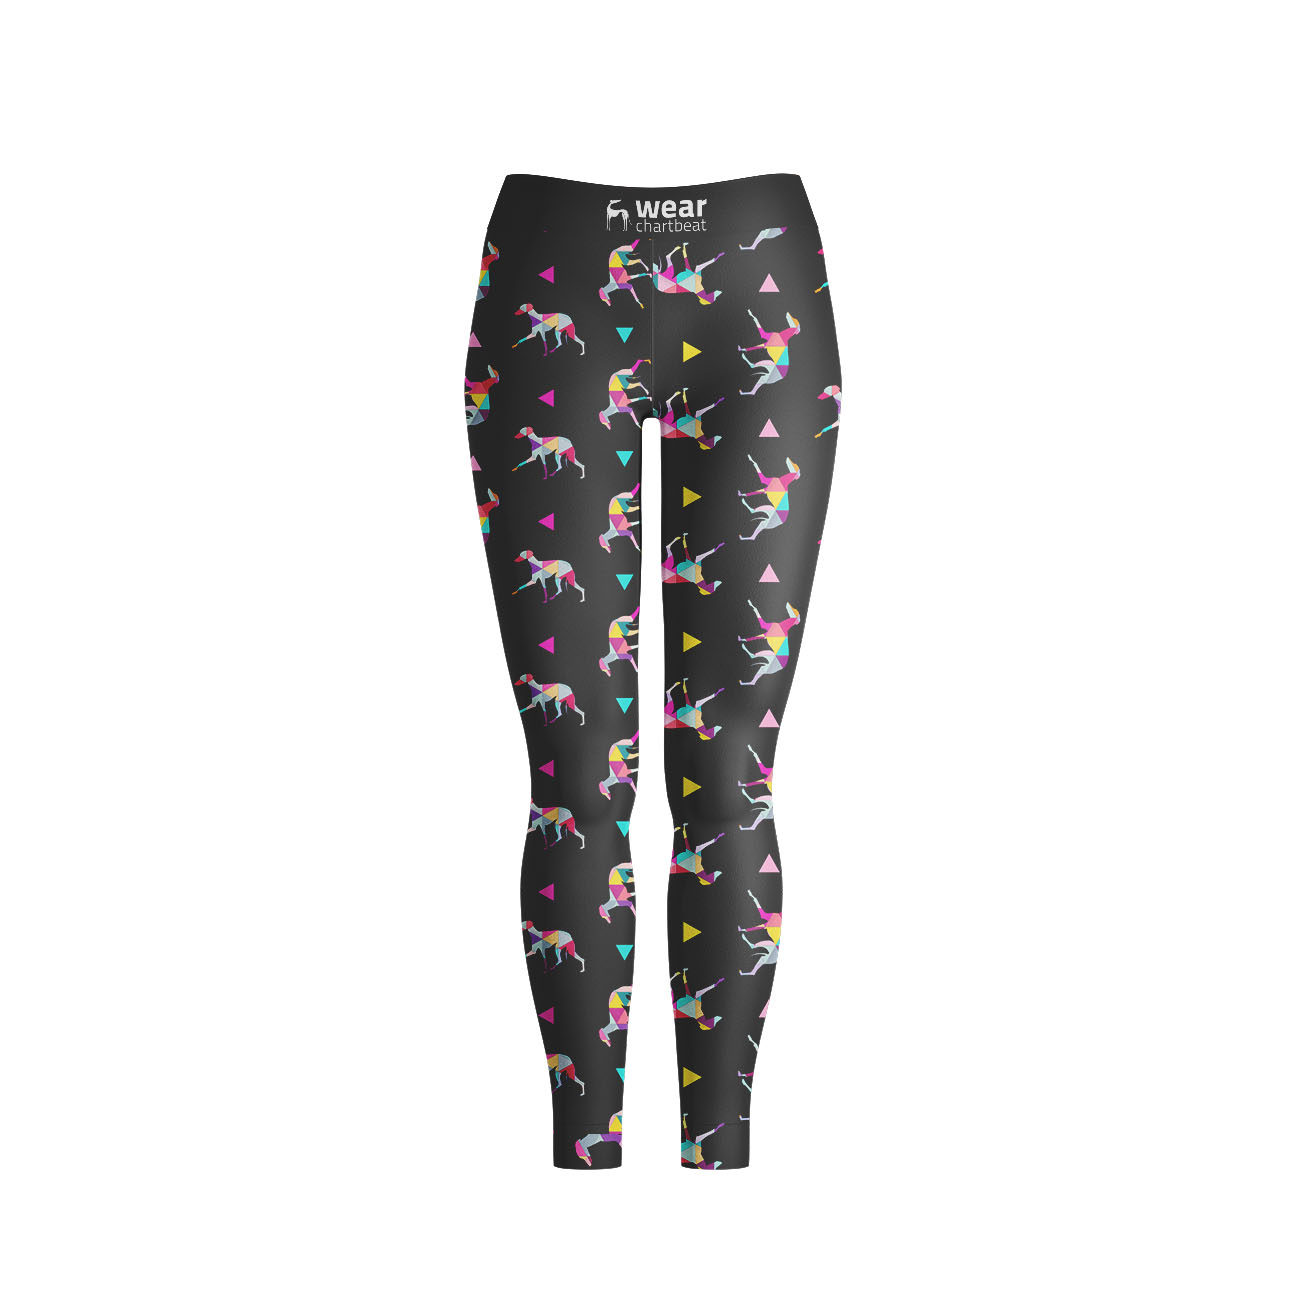 Sighthound leggings IGGY COLOR HEX - Wear.Chartbeat image 1